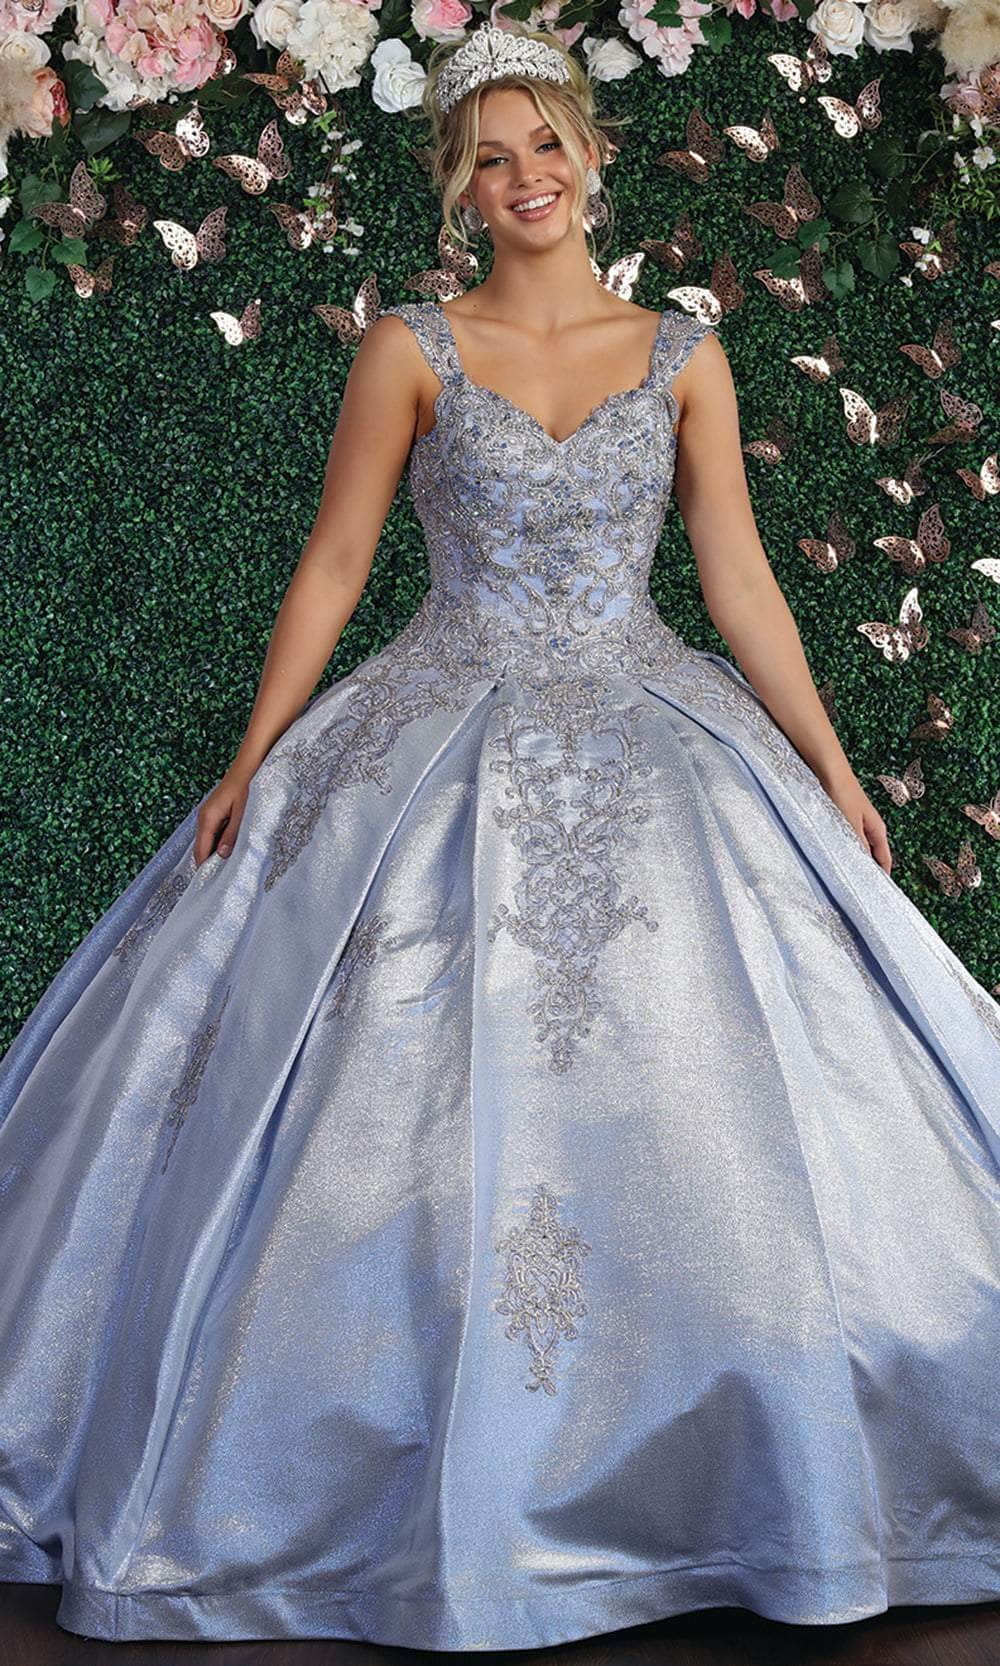 May Queen LK156 - Ornated Sleeveless Bodice Box Pleated Ball gown Special Occasion Dress 4 / Dustyblue